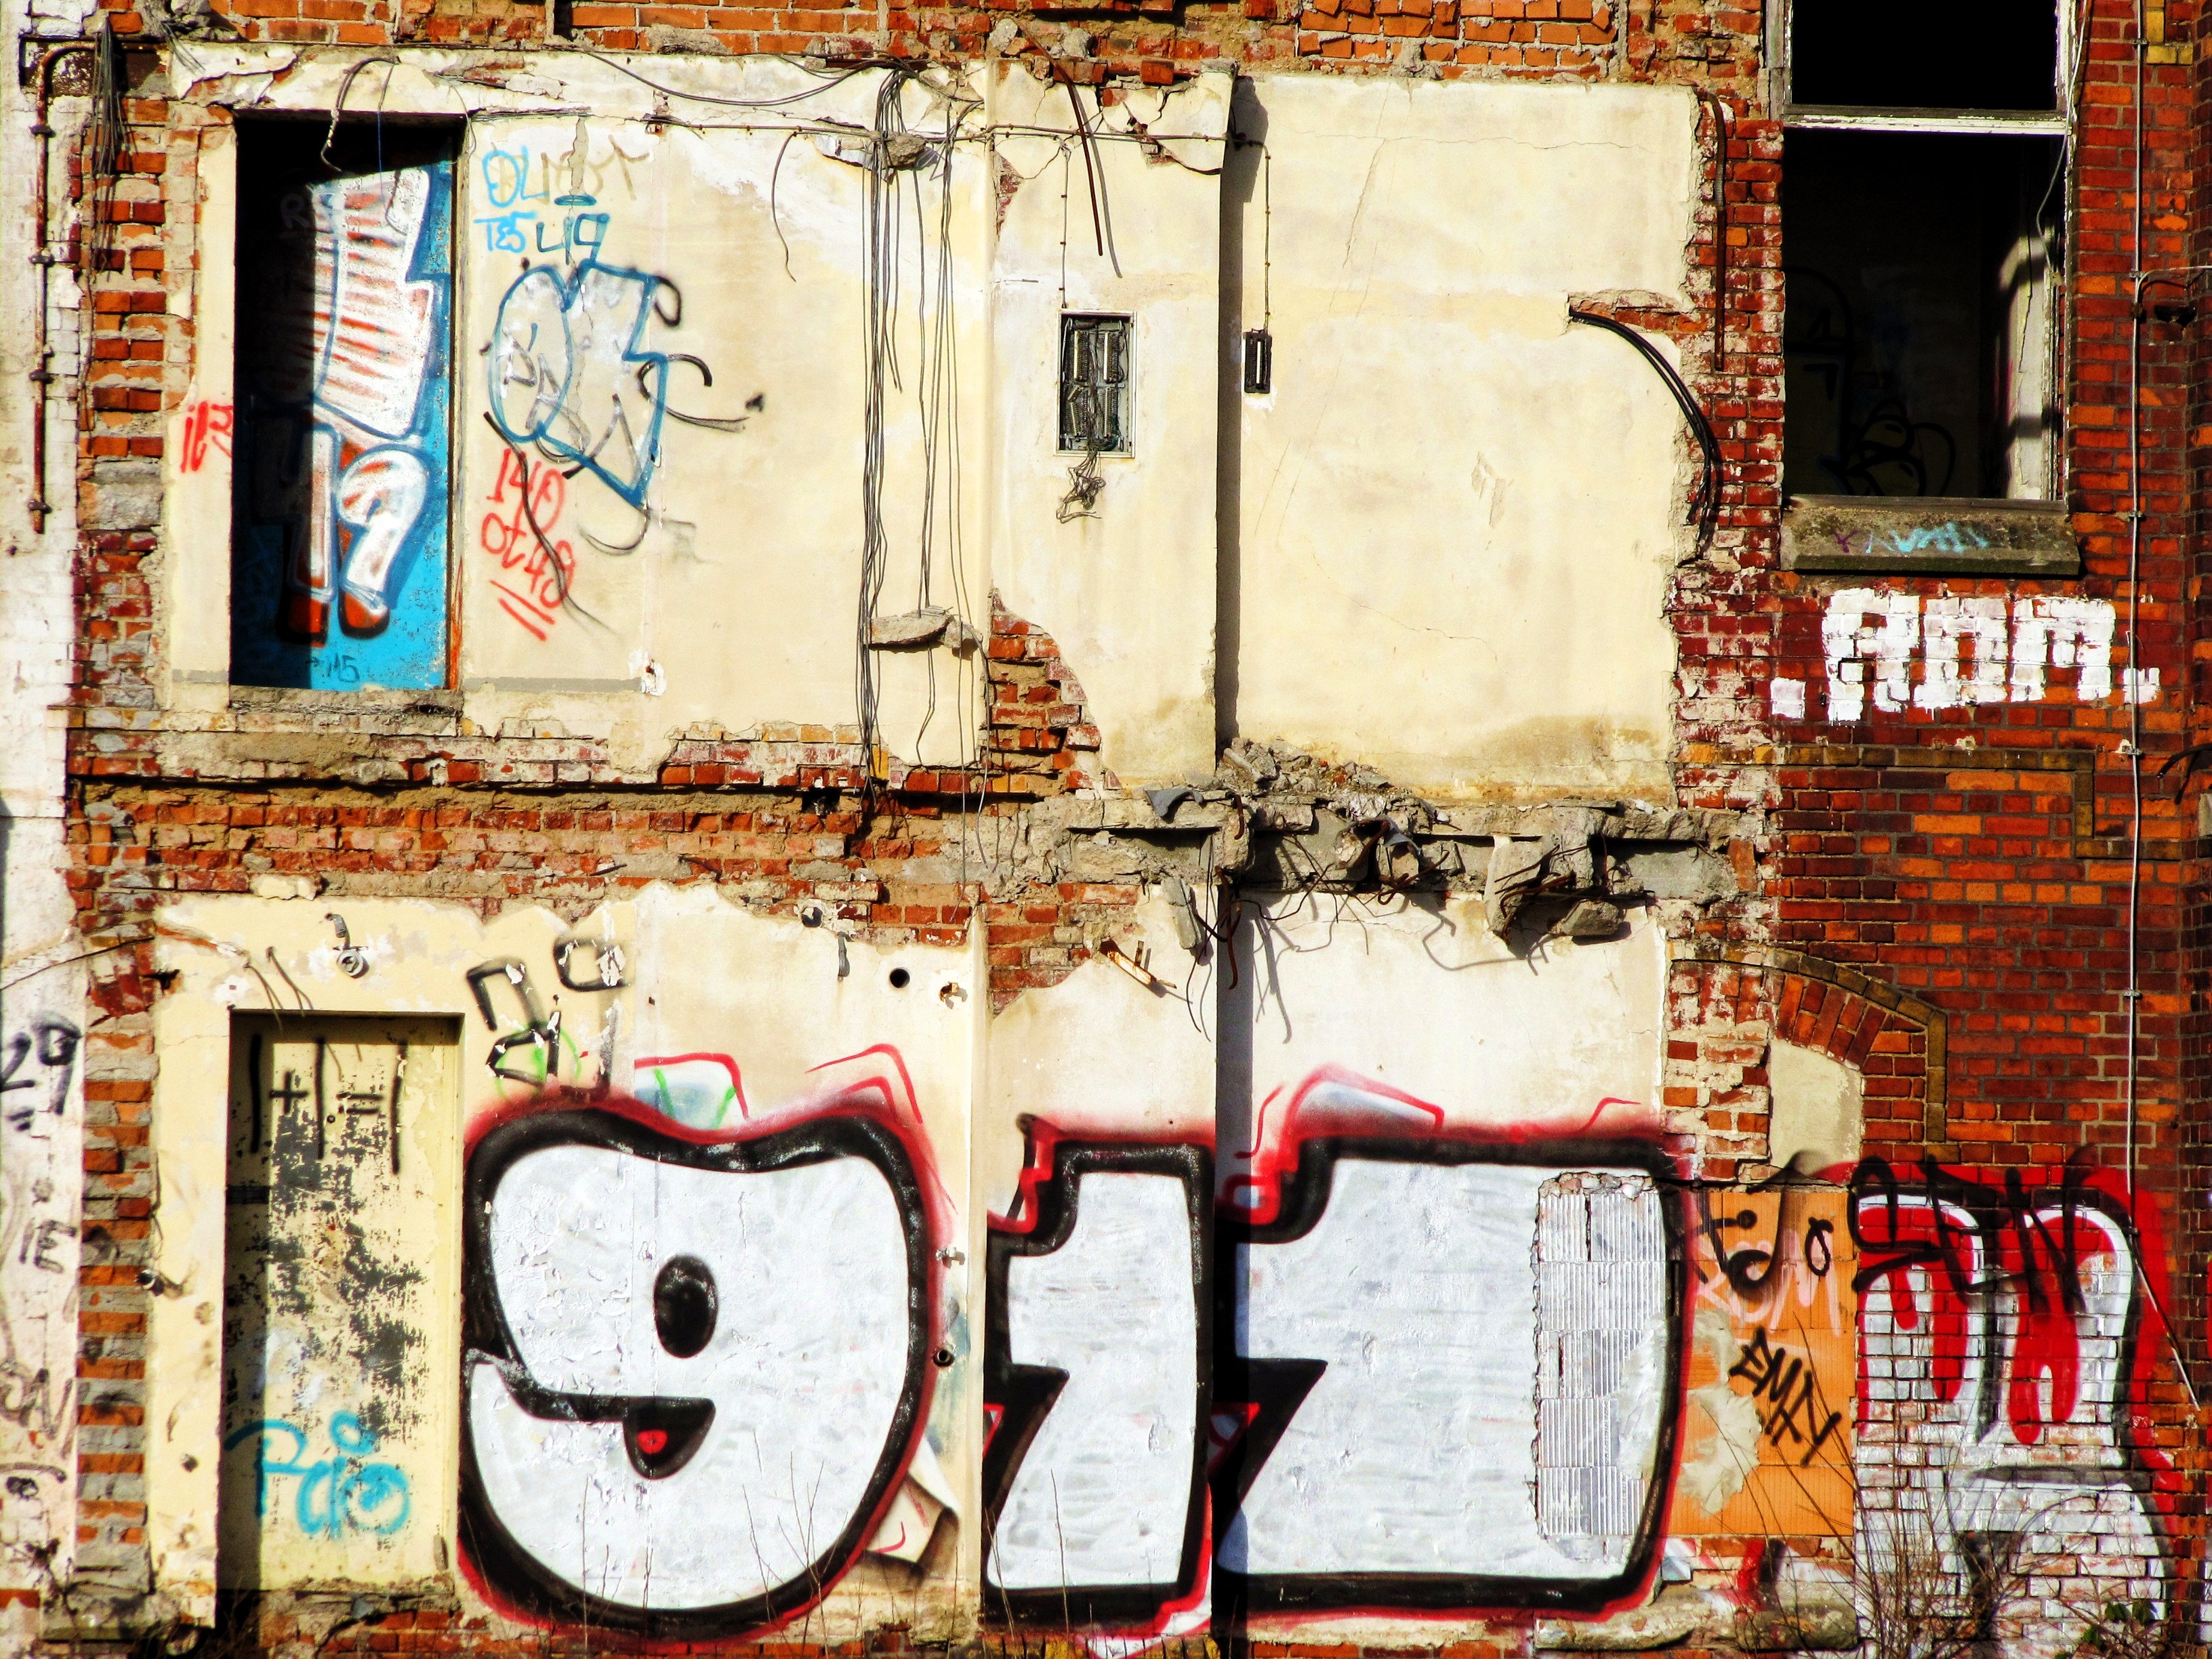 Lapsed, Building, Old, Hauswand, Factory, graffiti, text